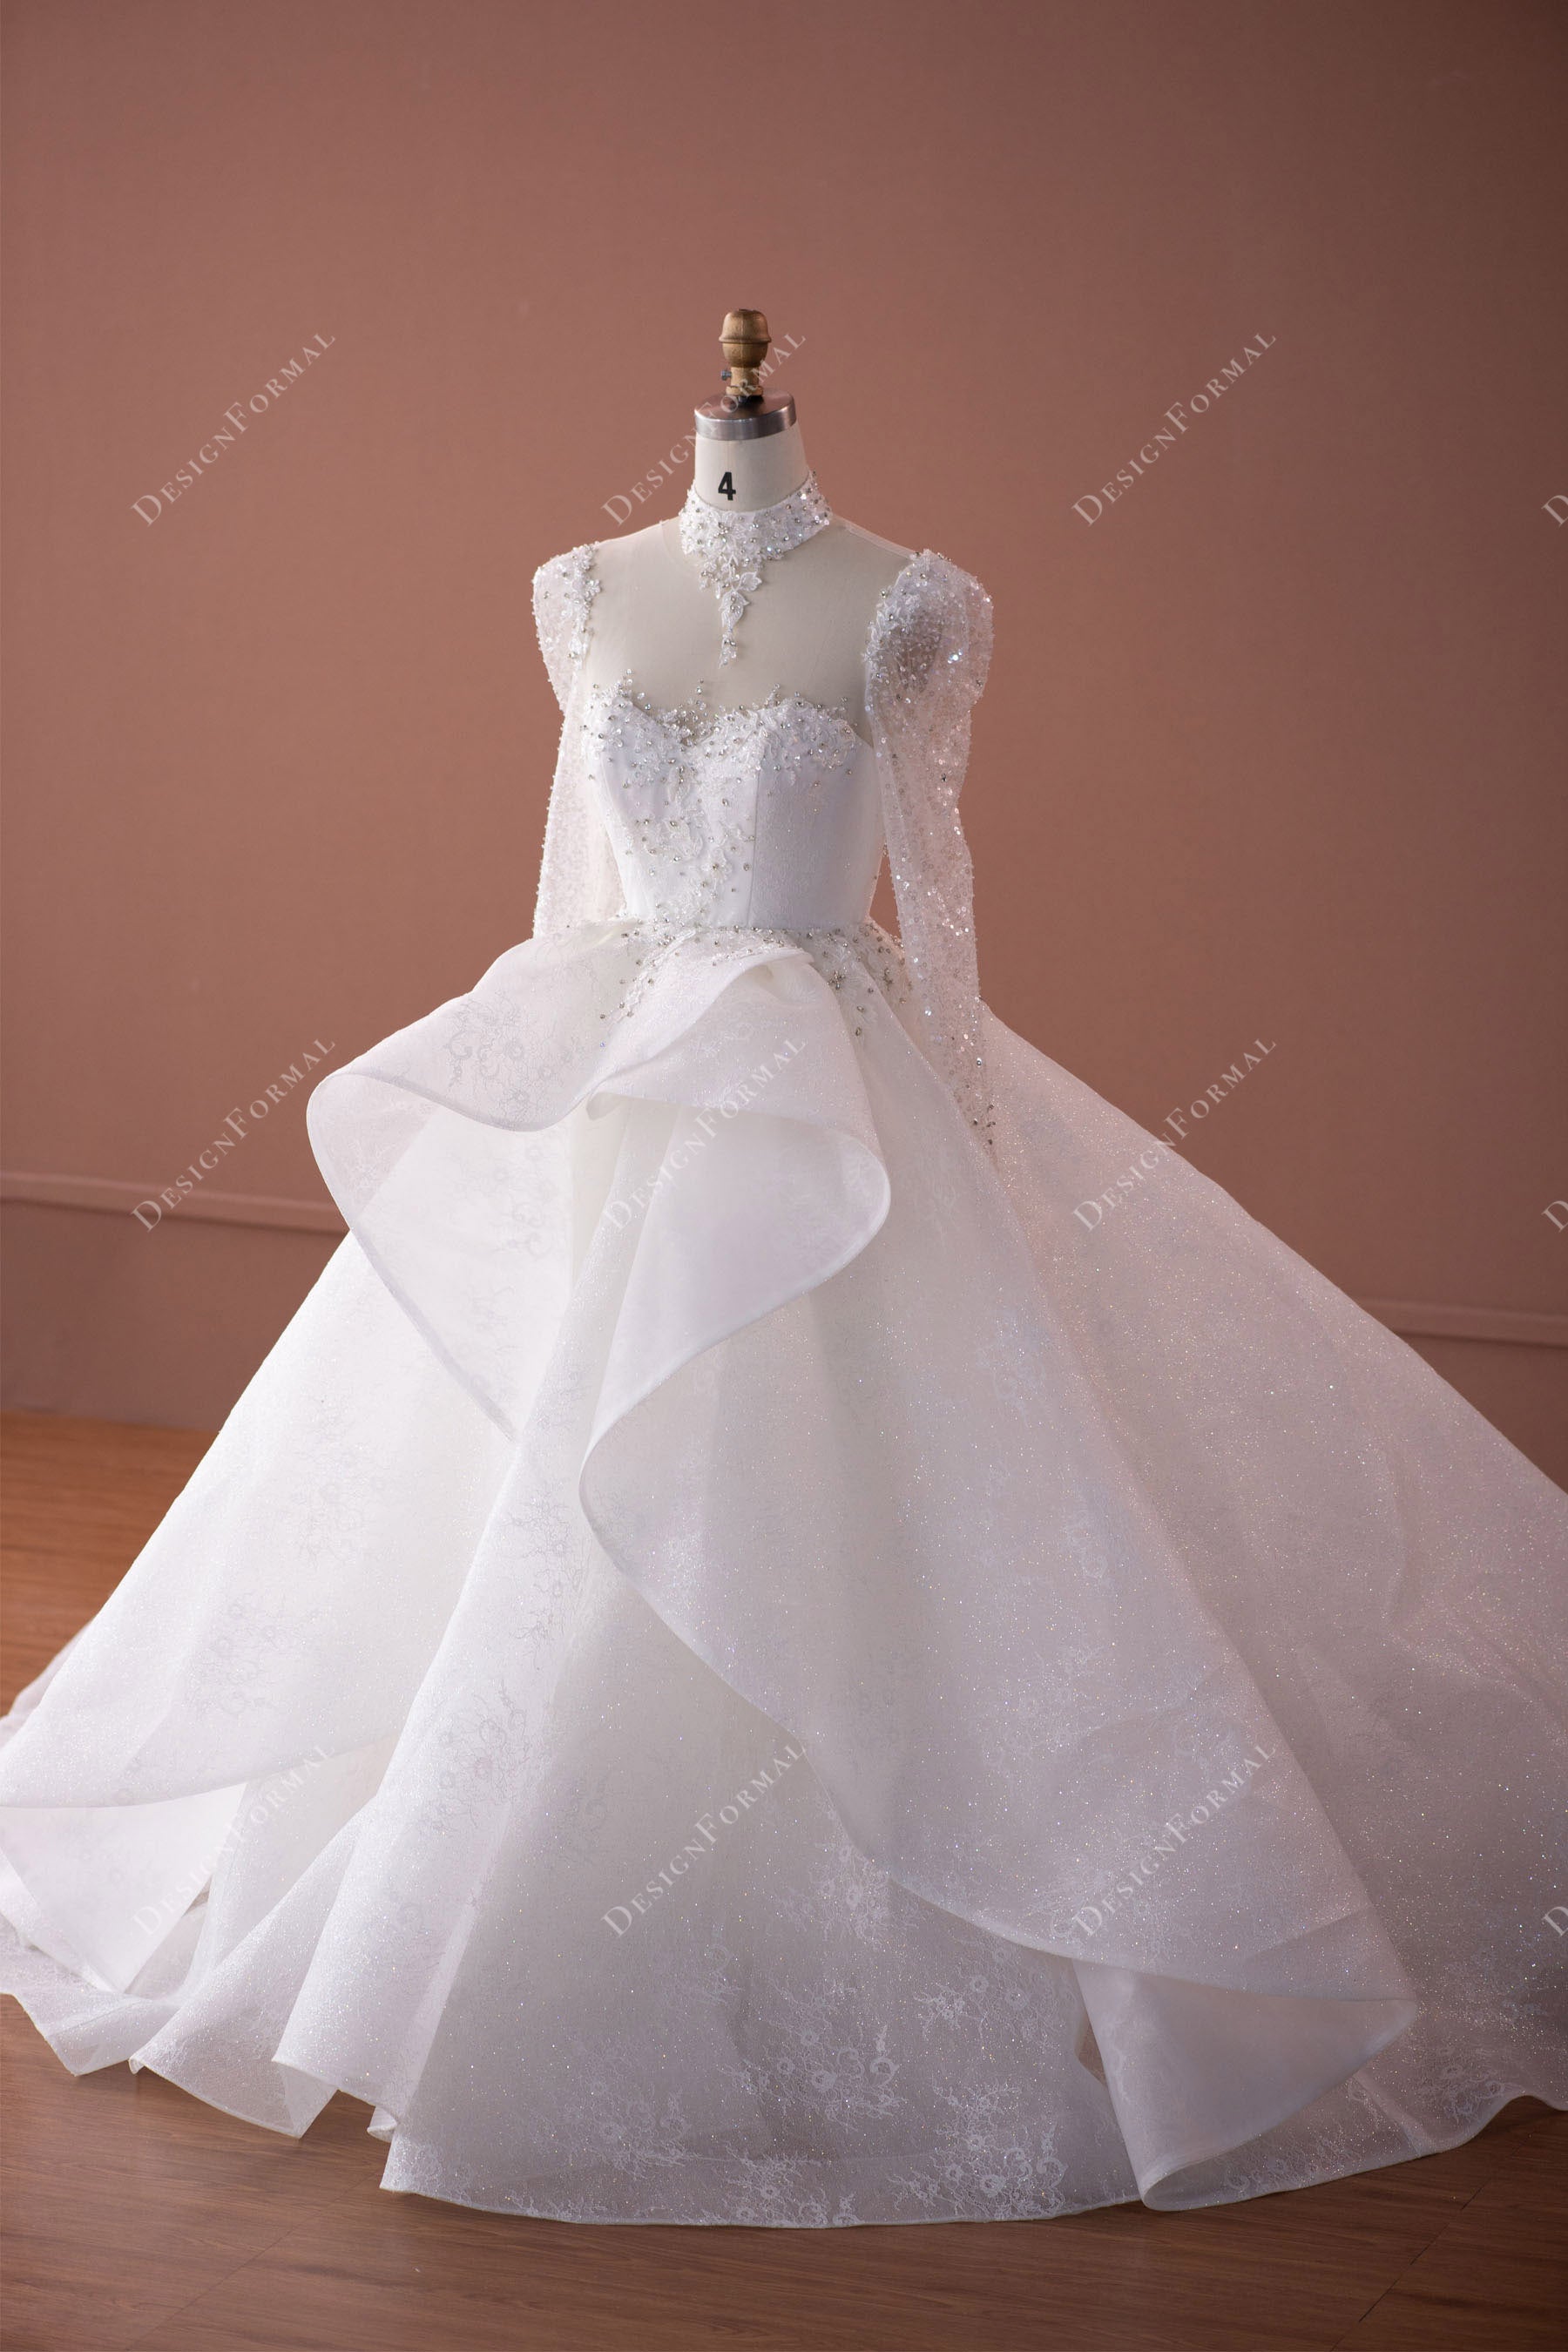 sparkly choker neck lace ruffled overskirt wedding ball gown